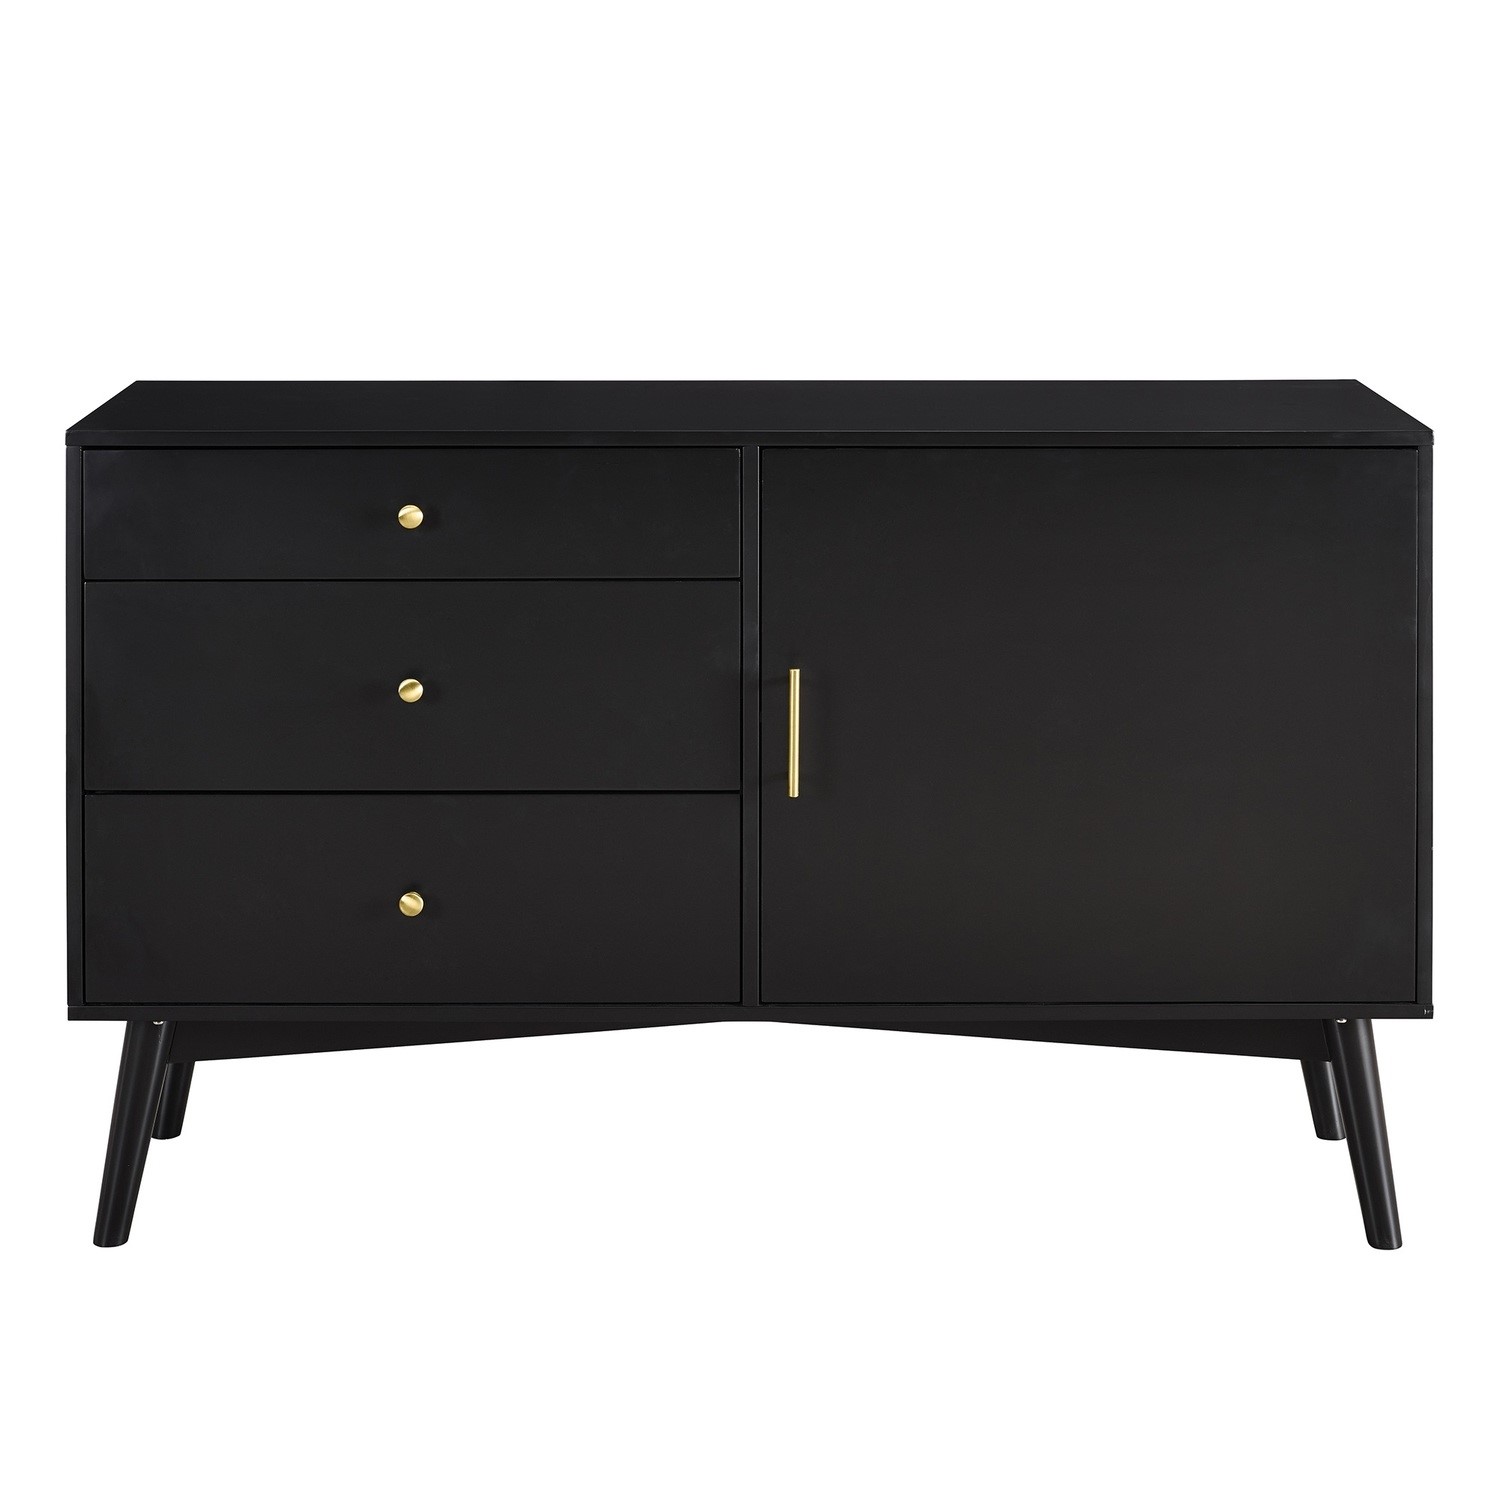 Foster Black Solid Wood Sideboard with Storage - Furniture123